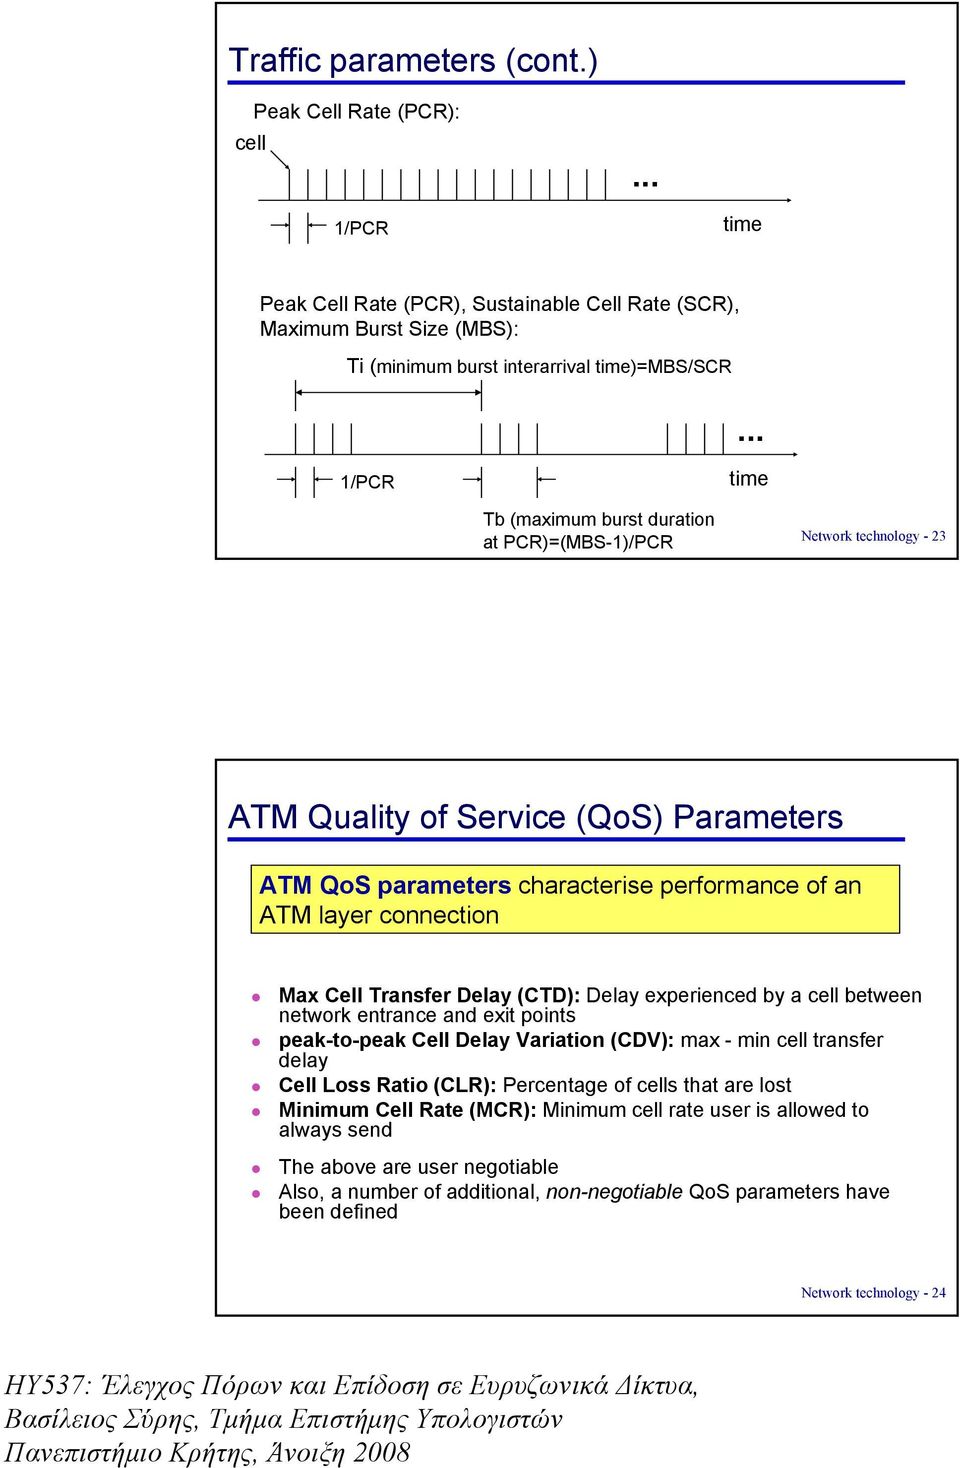 Cell Transfer Delay (CTD): Delay experienced by a cell between network entrance and exit points peak-to-peak Cell Delay Variation (CDV): max - min cell transfer delay Cell Loss Ratio (CLR):